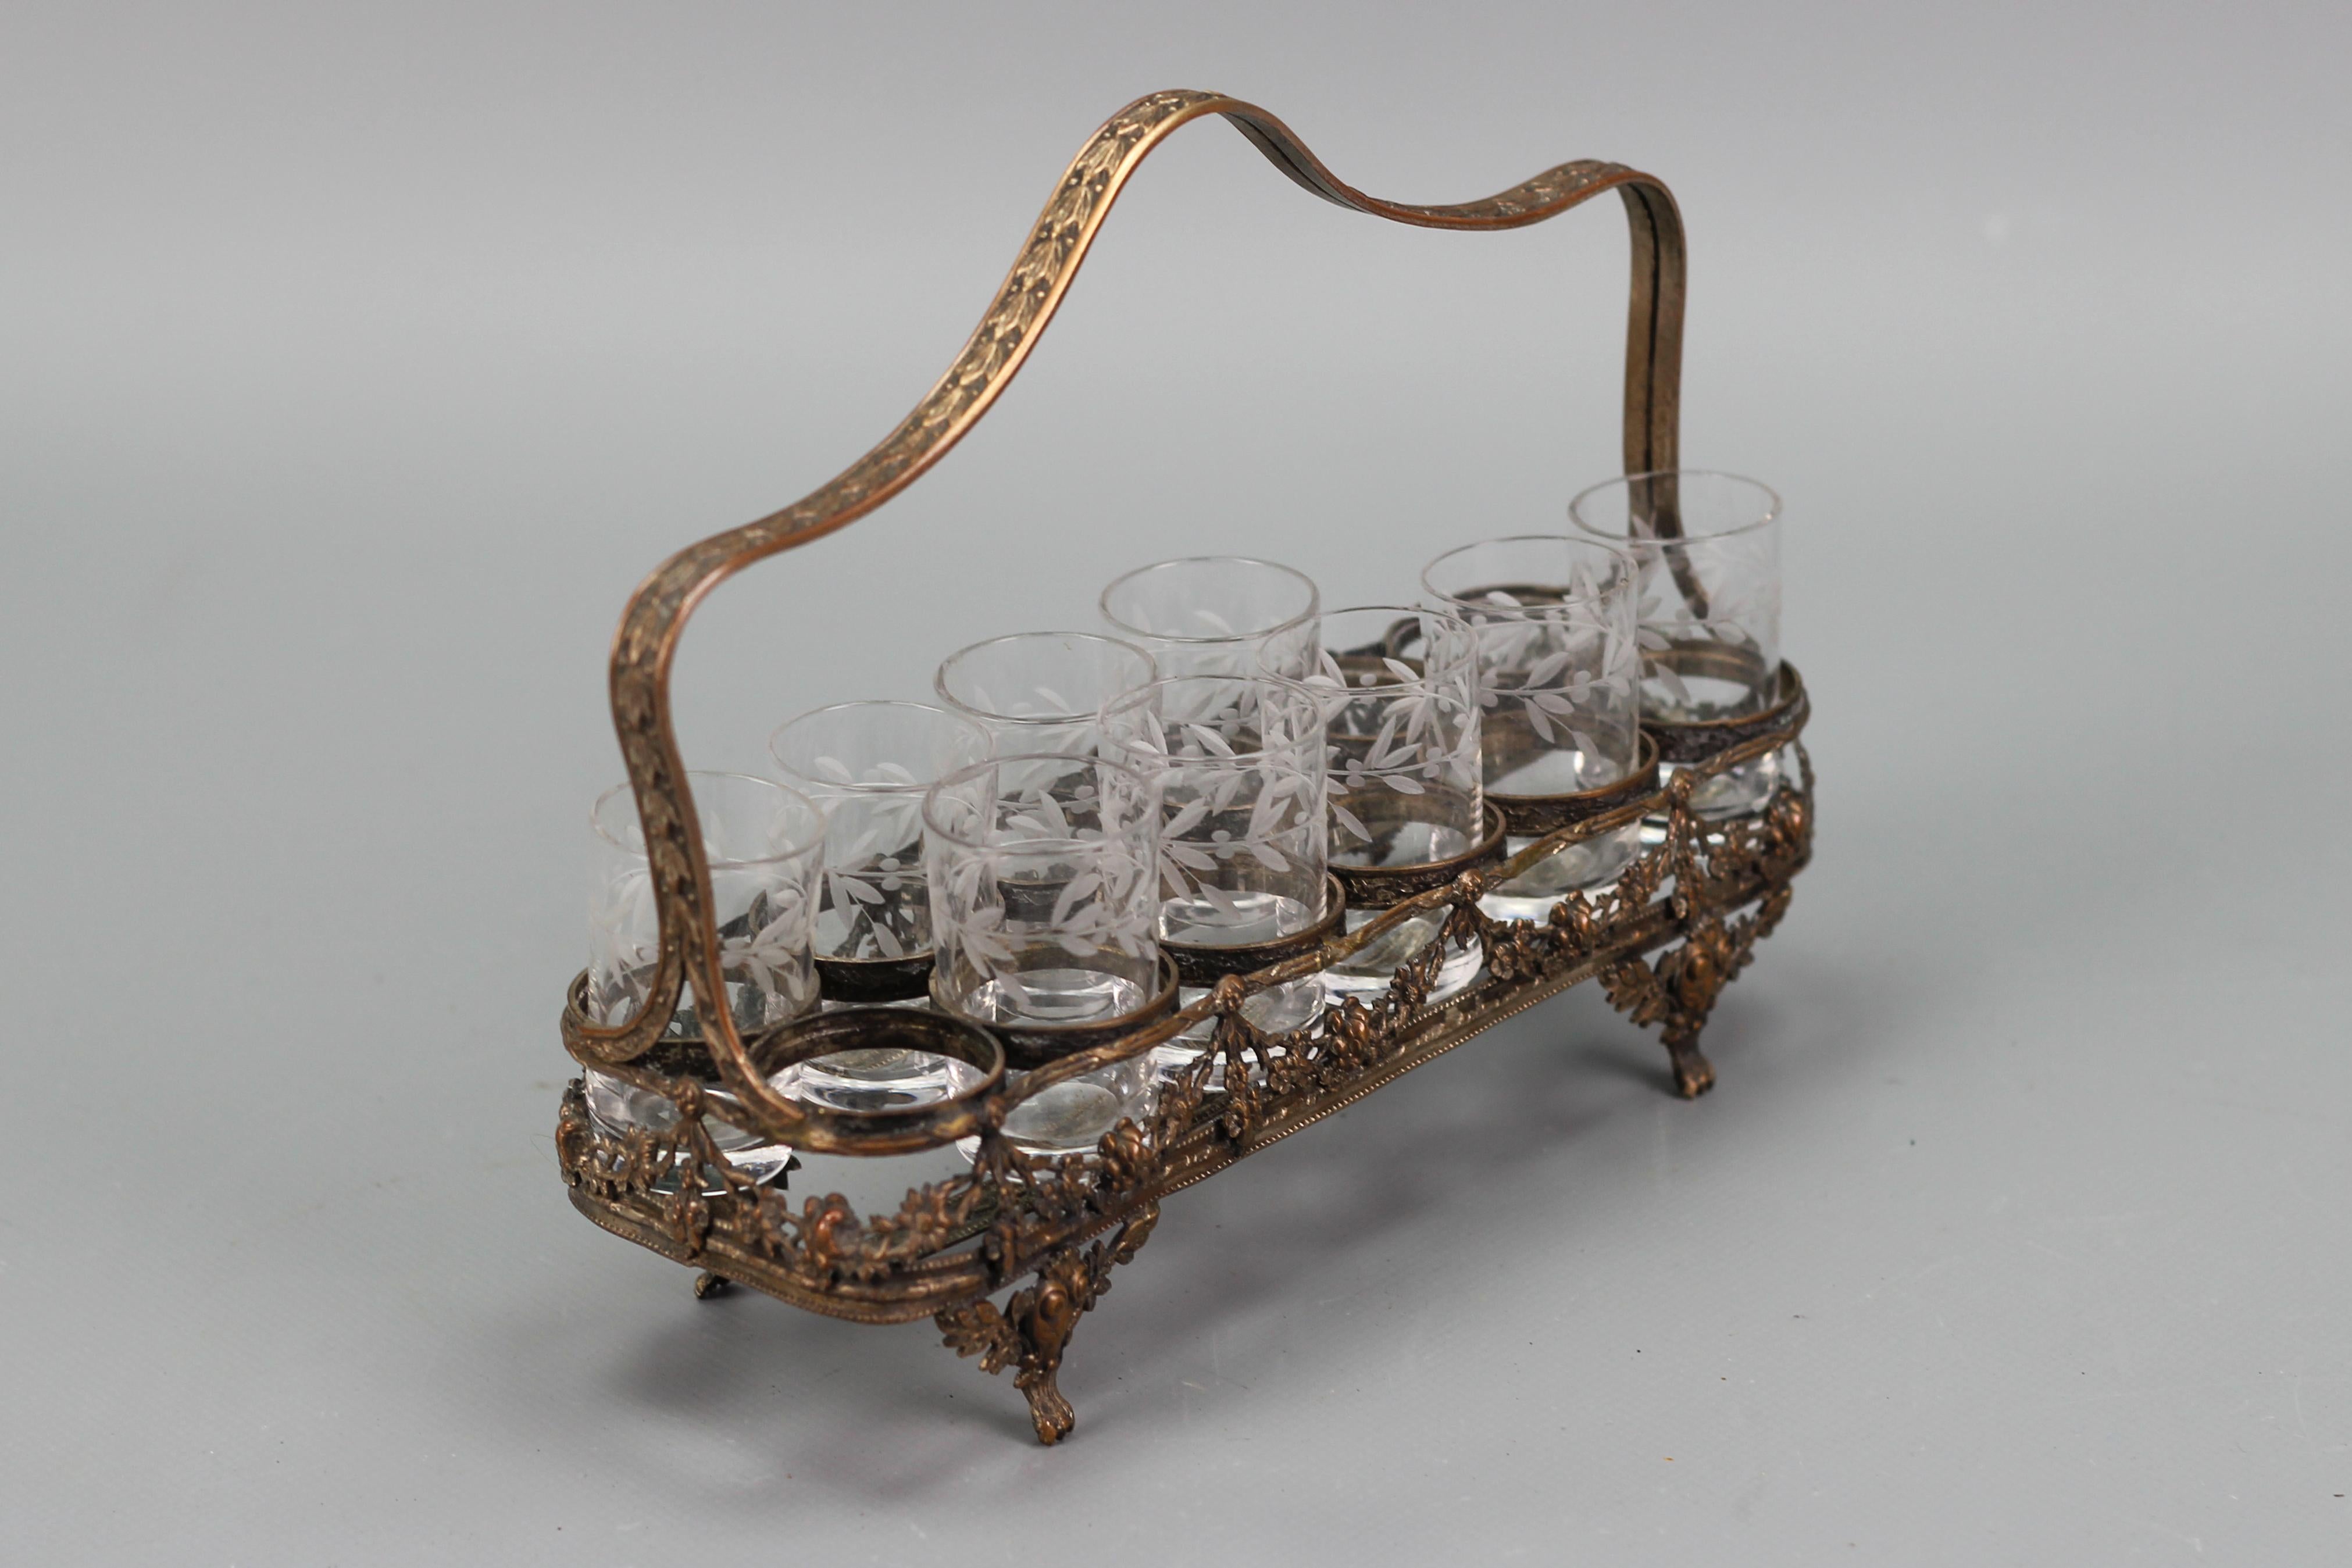 Antique French Art Nouveau nine glasses and brass basket serving set, ca. 1920.
This exquisite Art Nouveau serving set features nine clear glass liqueur or shot glasses with cut leaf decors and a brass basket with a place for twelve glasses. The